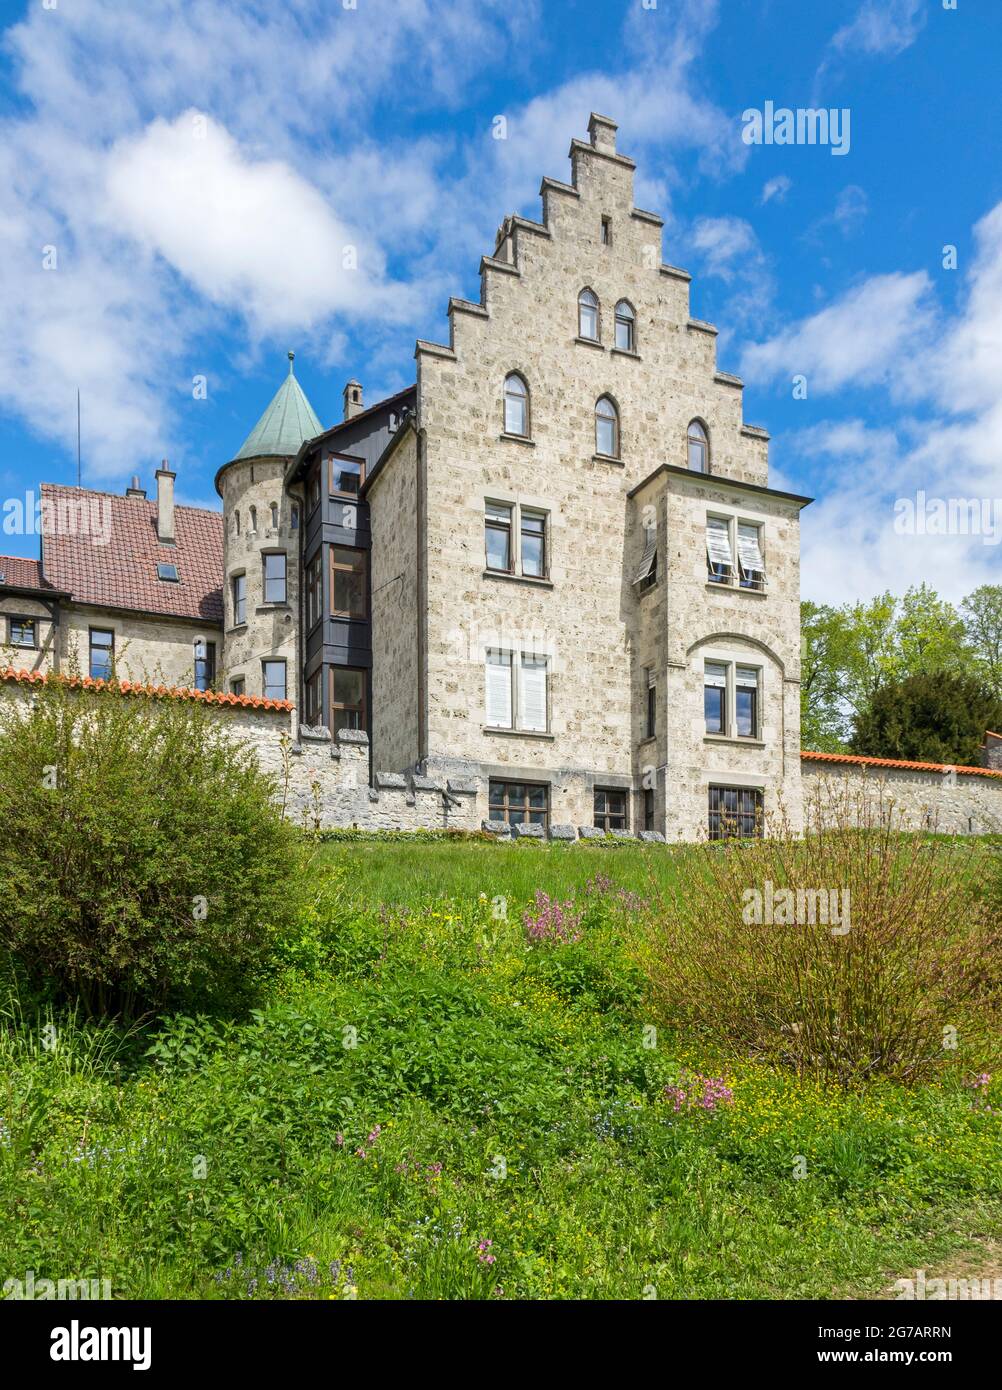 Lichtenstein Castle on the Swabian Alb near Honau in the Reutlingen district. The builder was Wilhelm Graf von Württemberg (later Duke of Urach), a cousin of the king. In the picture, the Princely Building Stock Photo